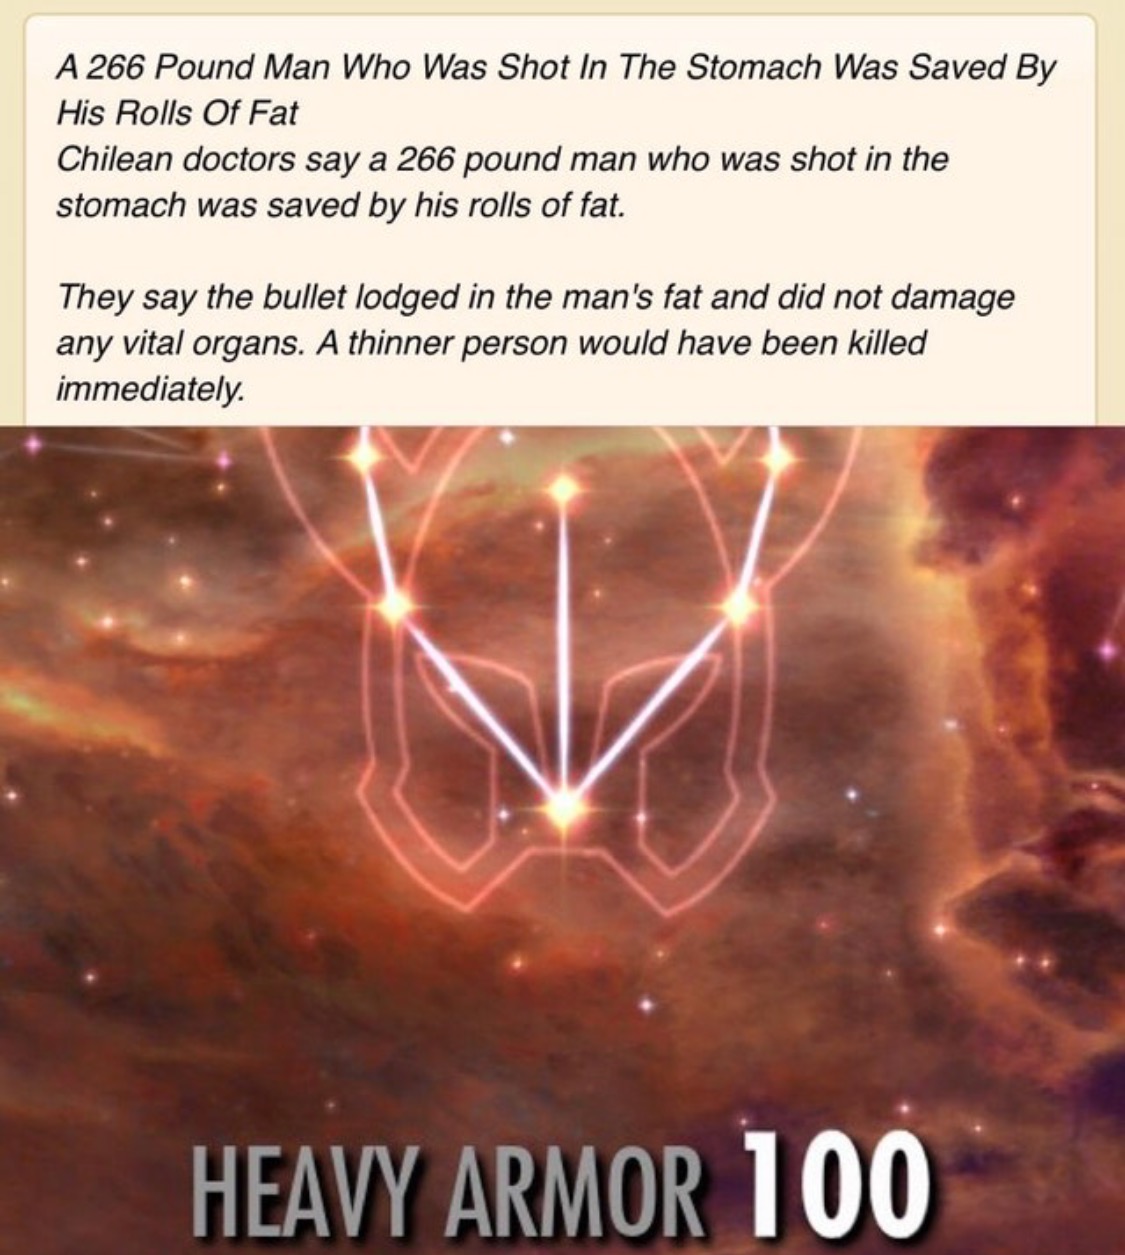 Meme about man who was so fat it stopped a bullet from reaching his organs, HEAVY ARMOR 100 awards.